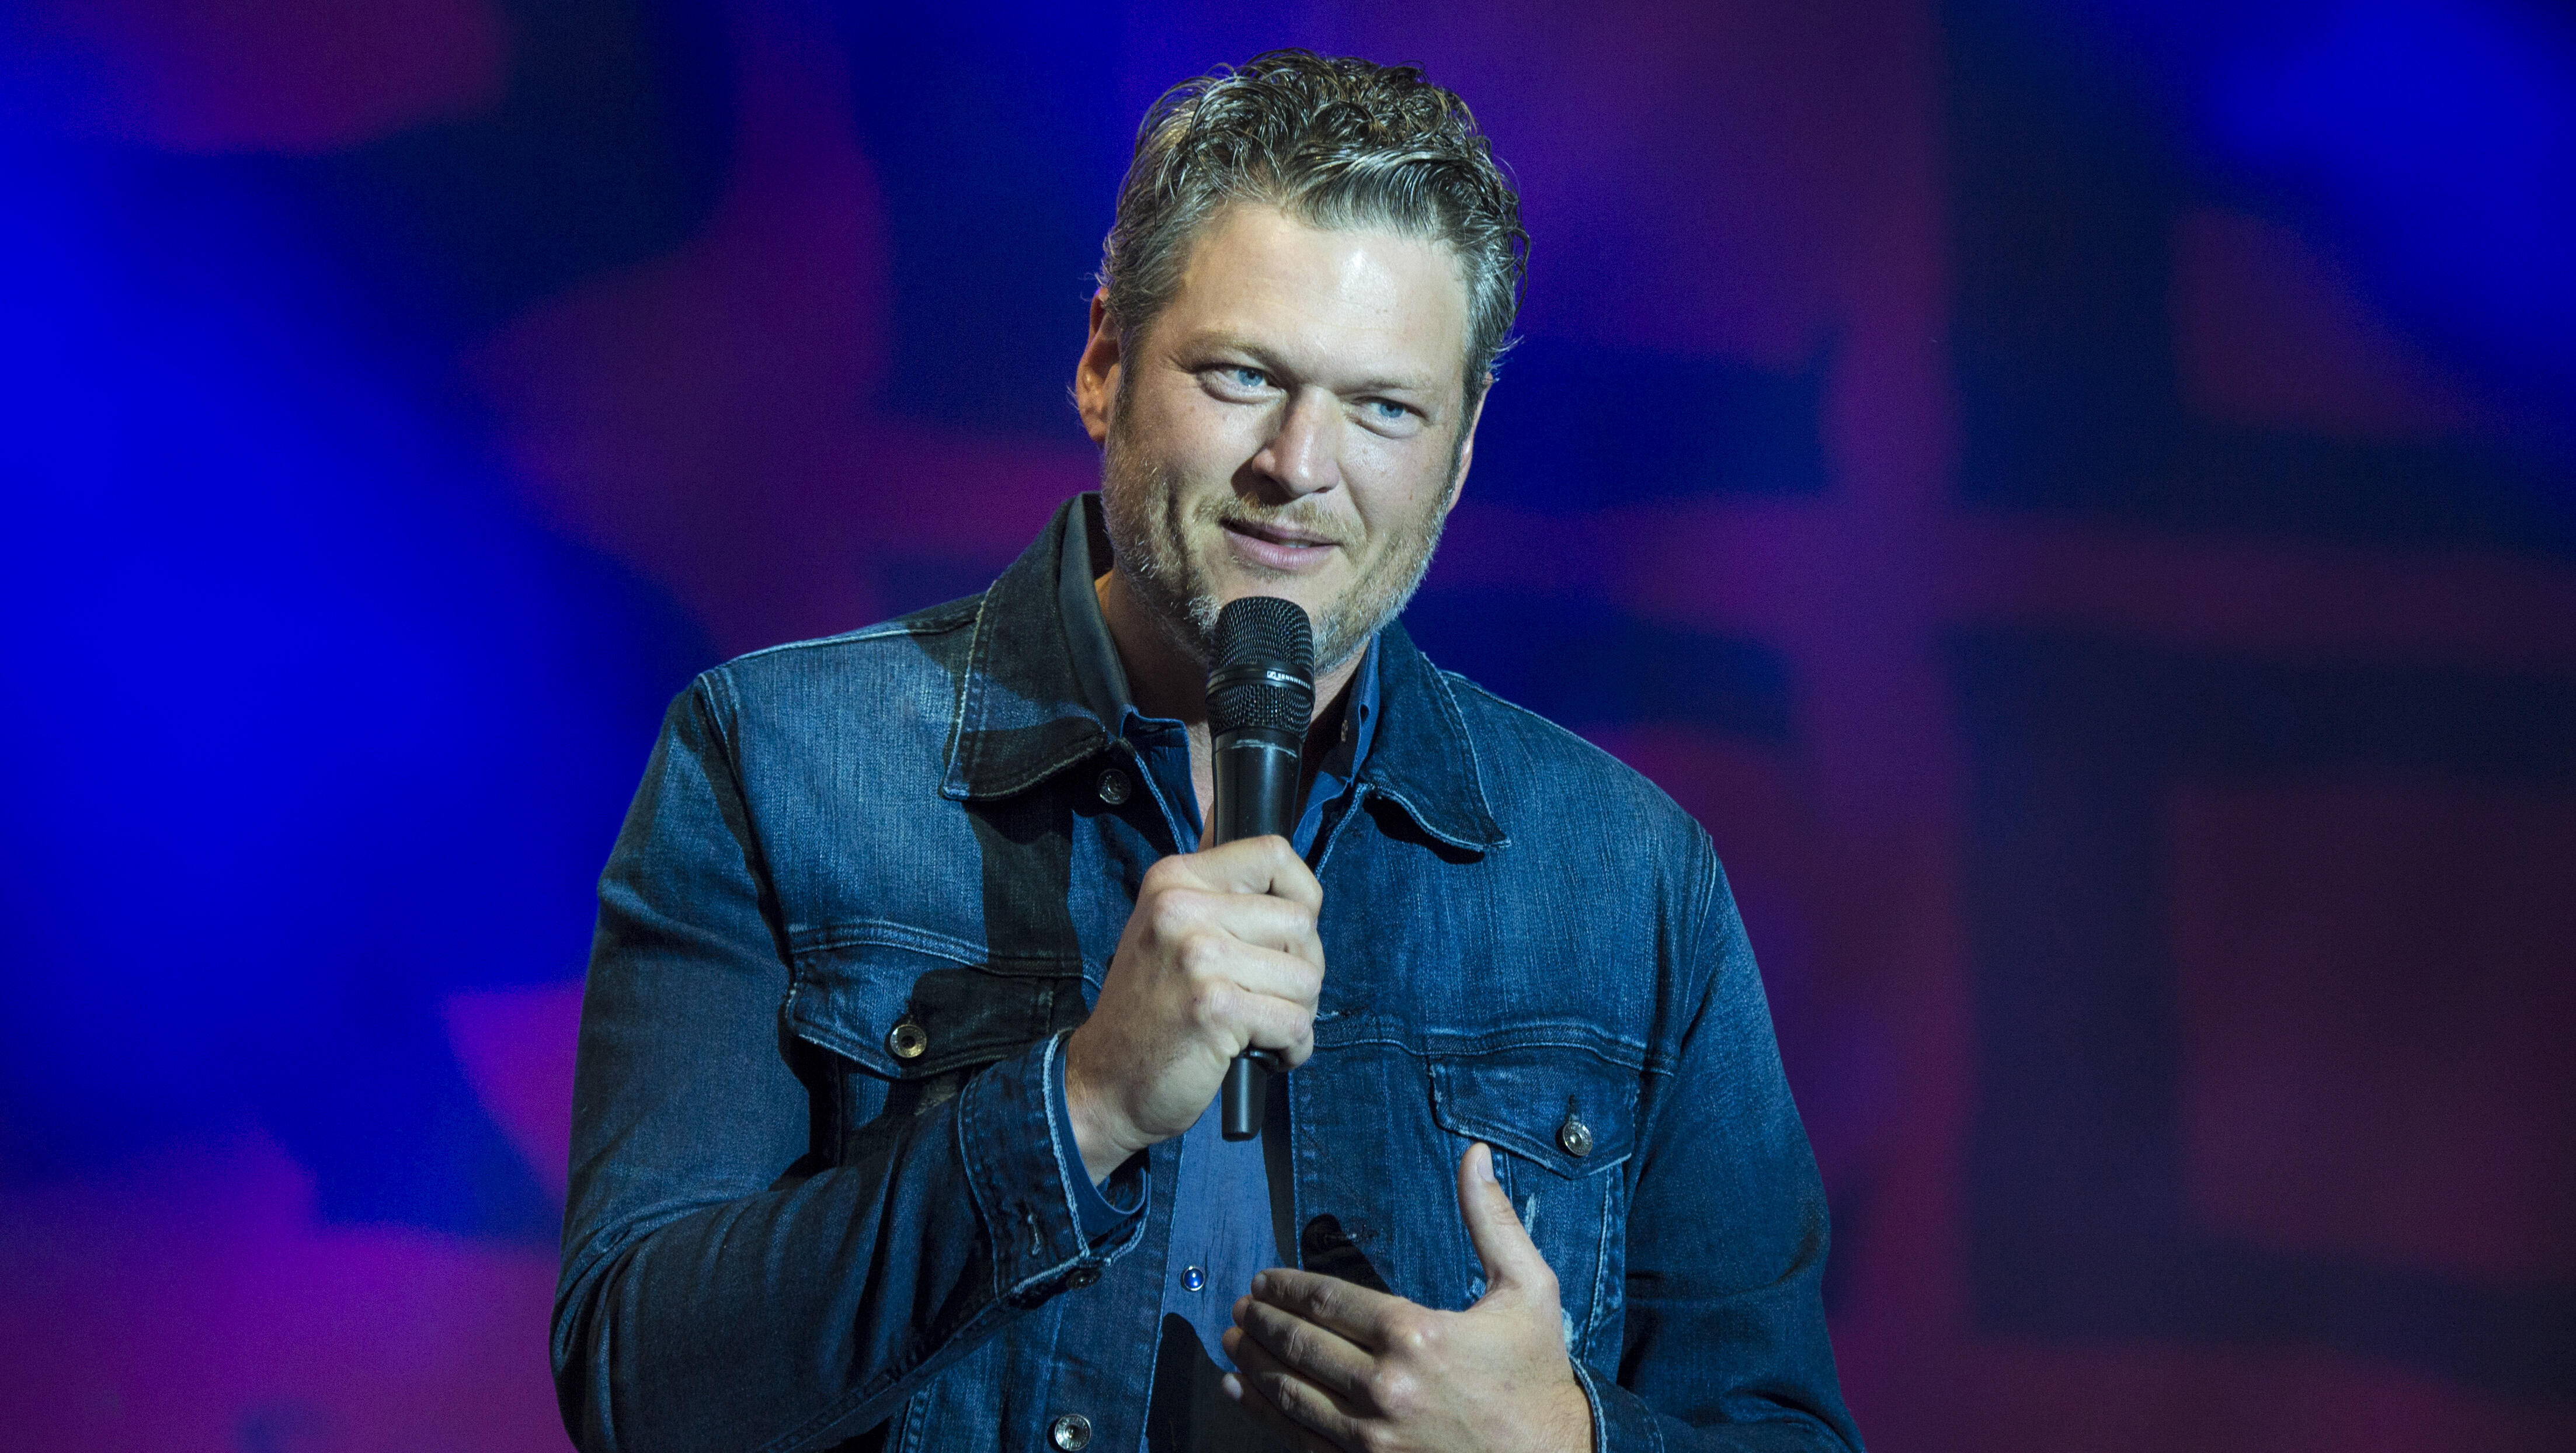 Blake Shelton Reveals 'Friends and Heroes 2019 Tour' iHeart